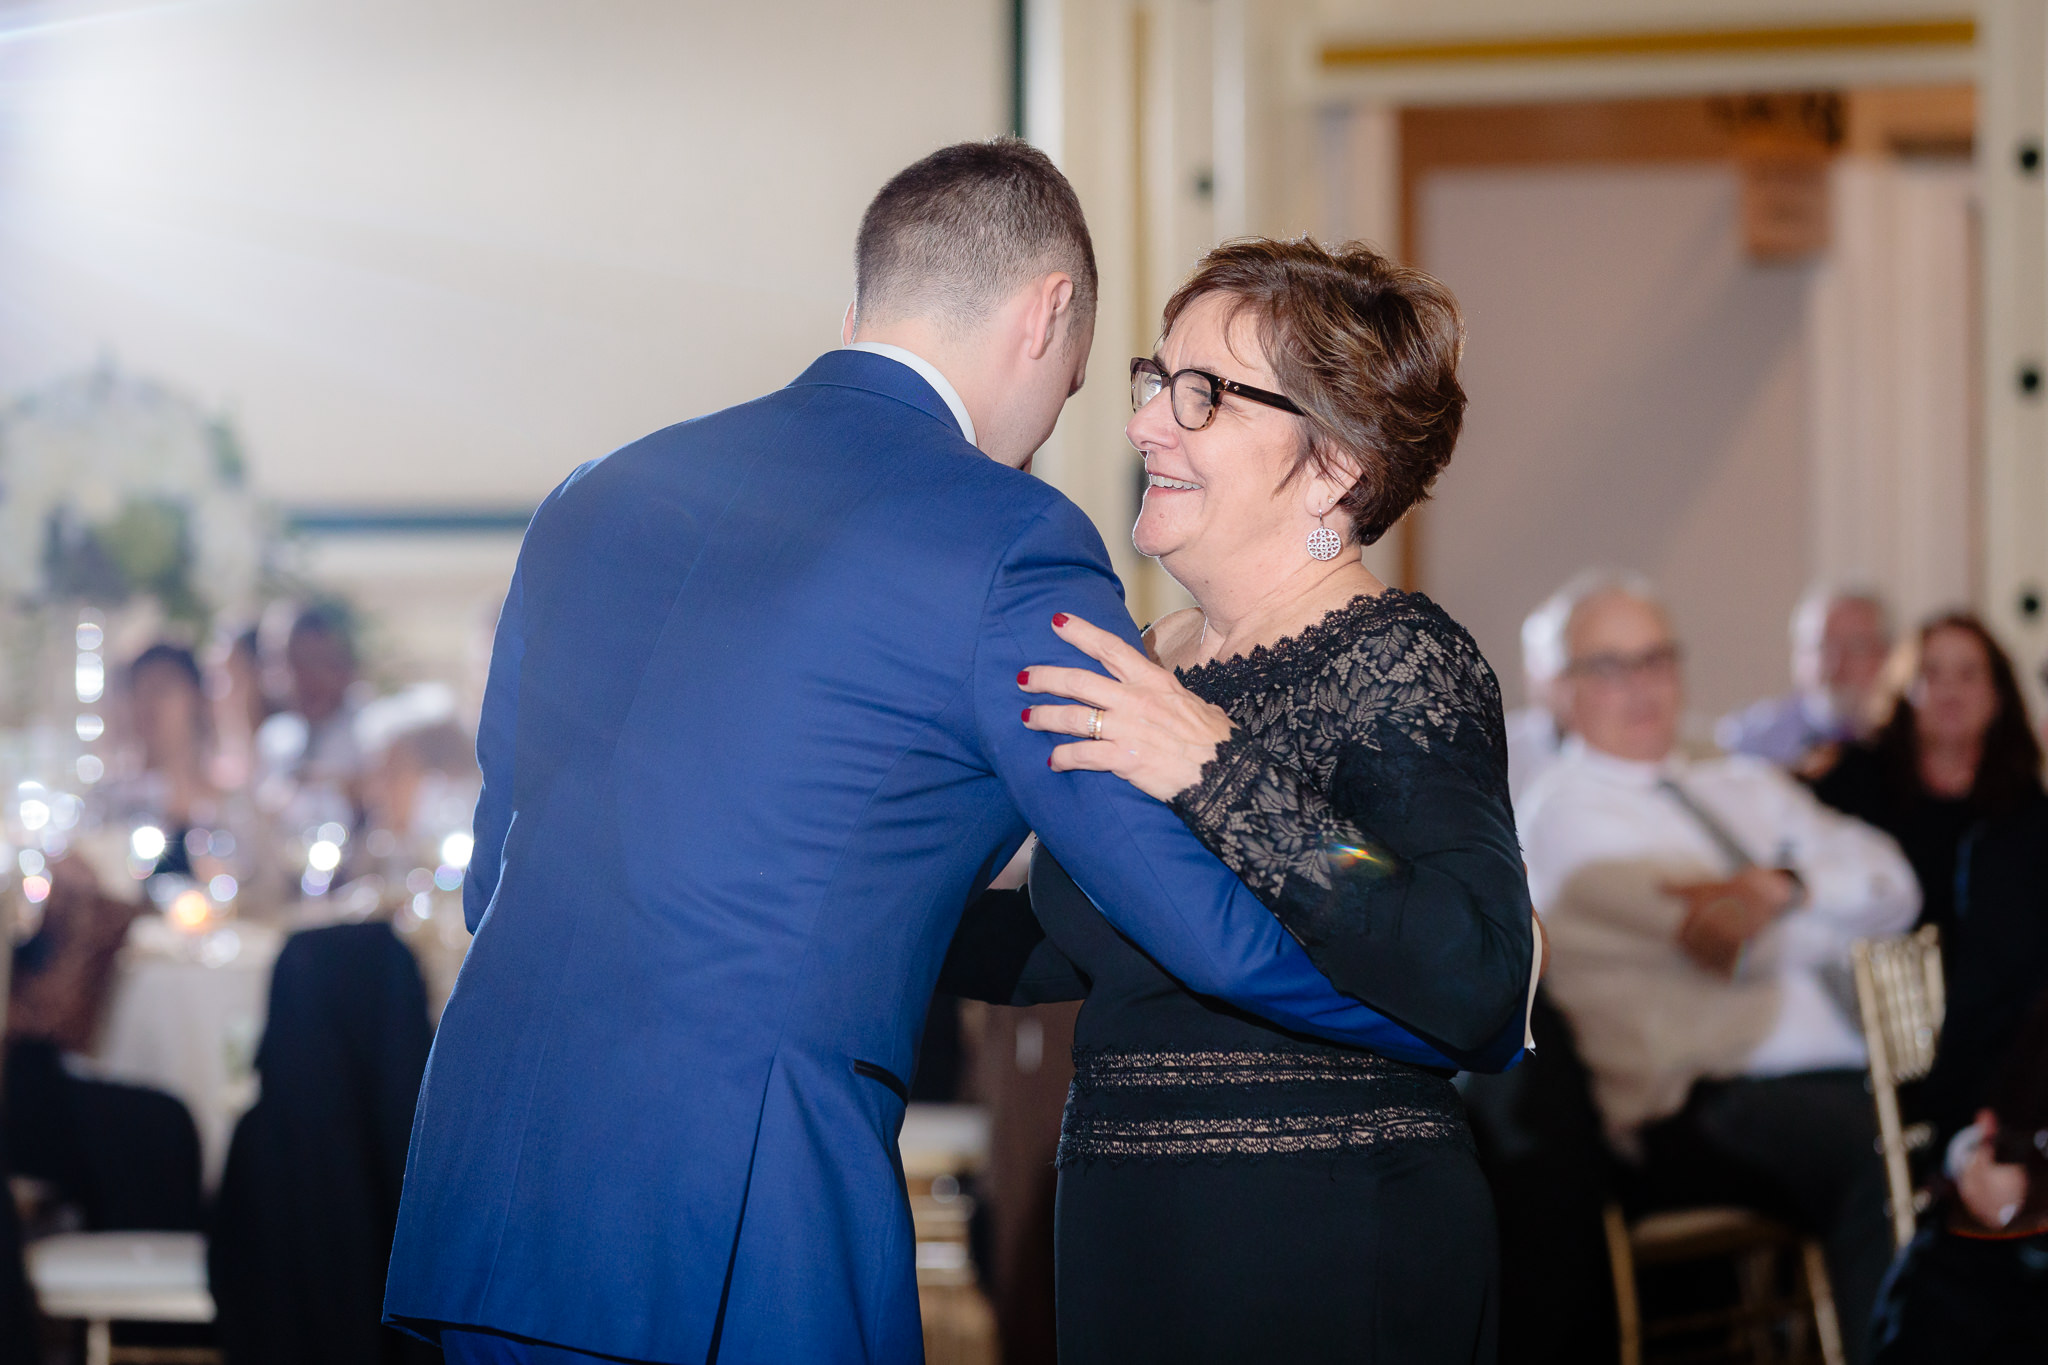 Mother-son dance at a Soldiers & Sailors wedding reception